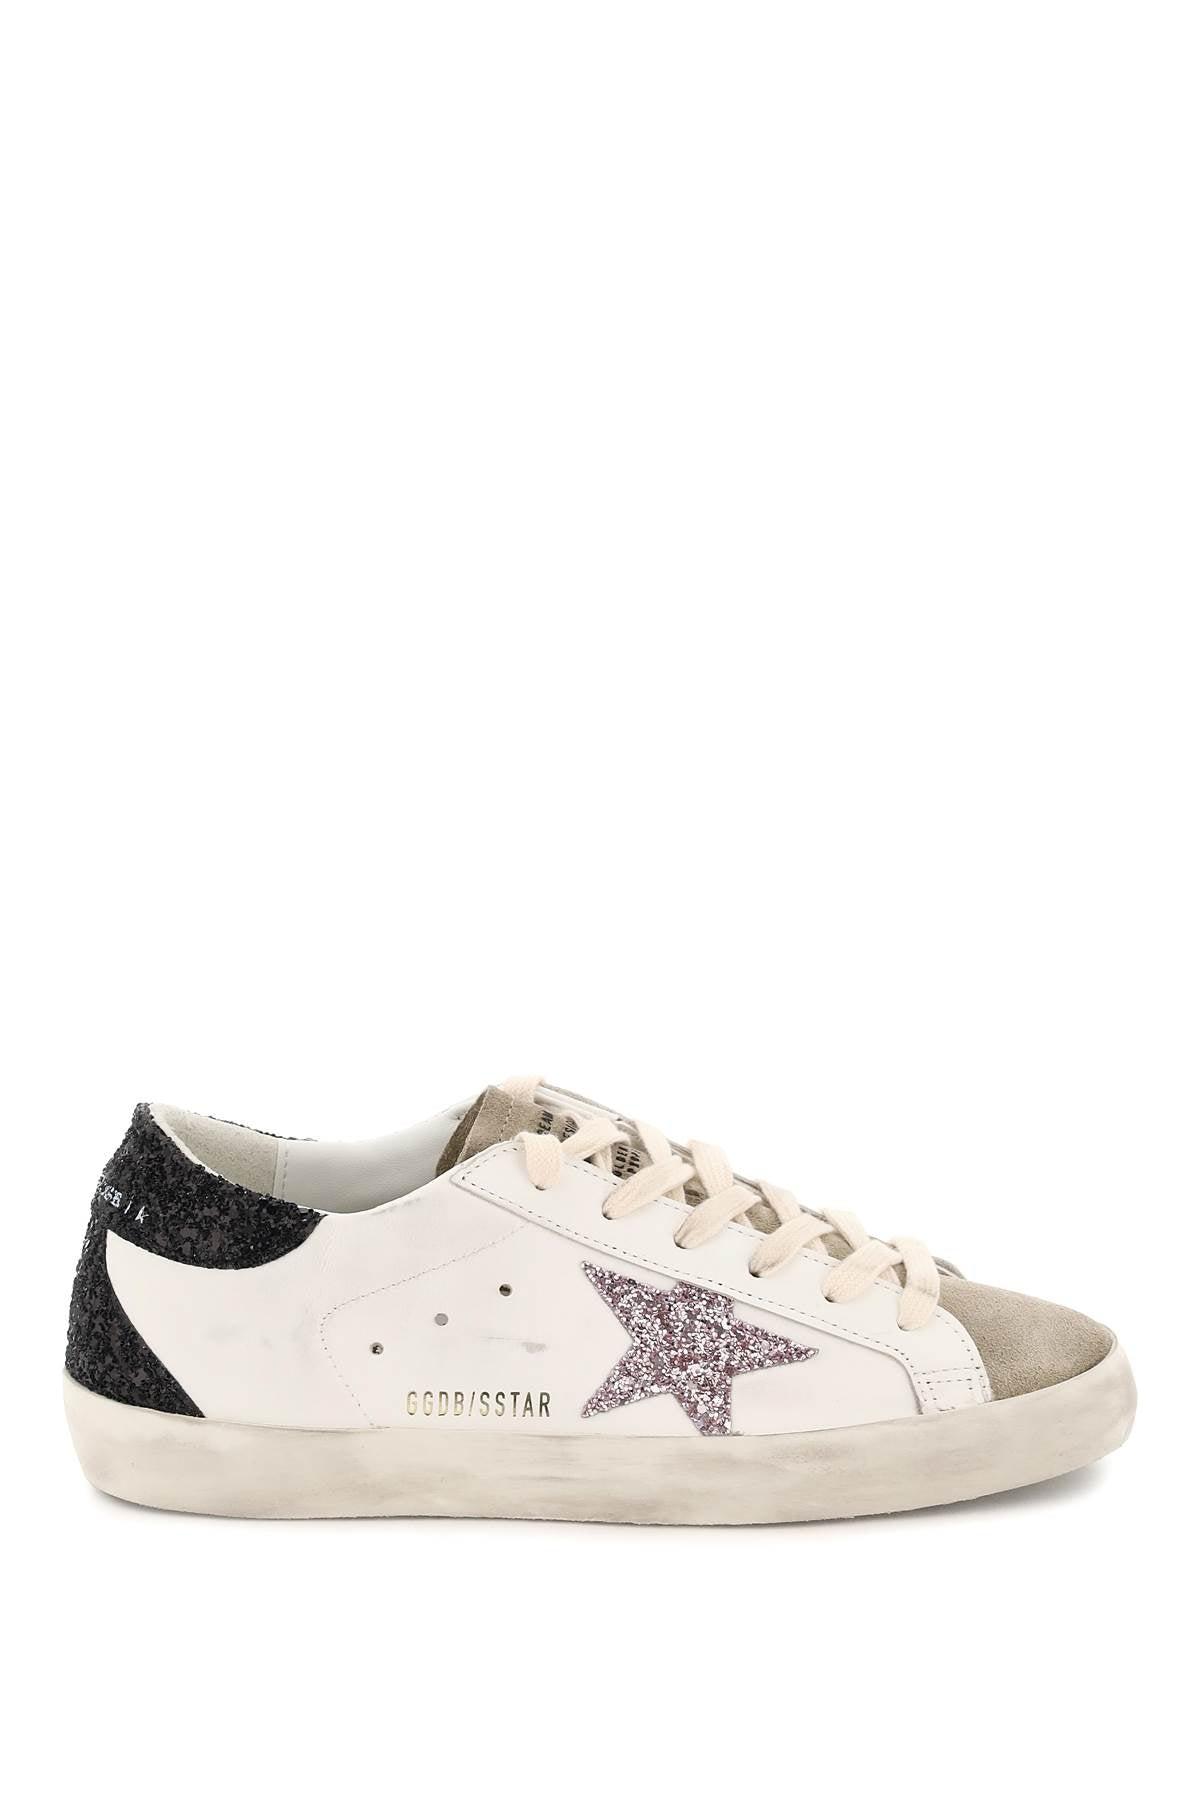 Golden Goose Super-star Sneakers in White | Lyst